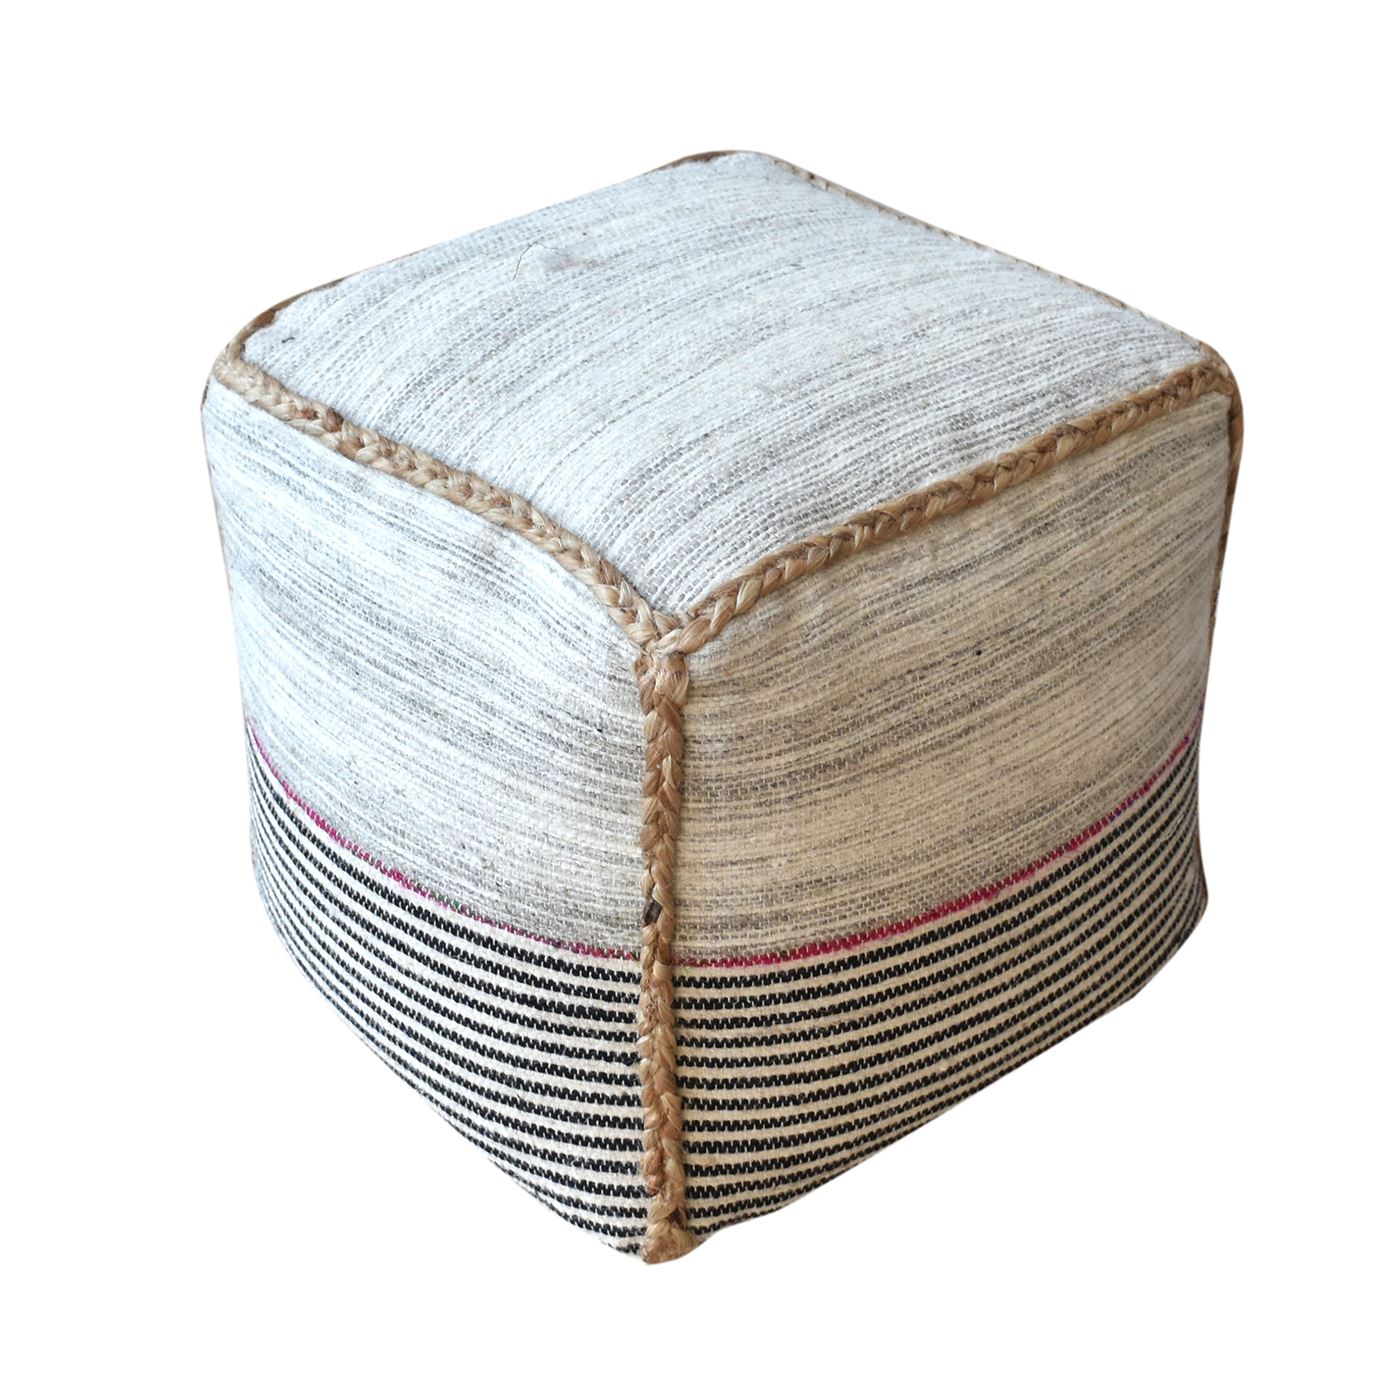 Arta Pouf, Hemp, Wool, Recycled Fabric, Natural, Charcoal, Multi, Pitloom, Cut And Loop